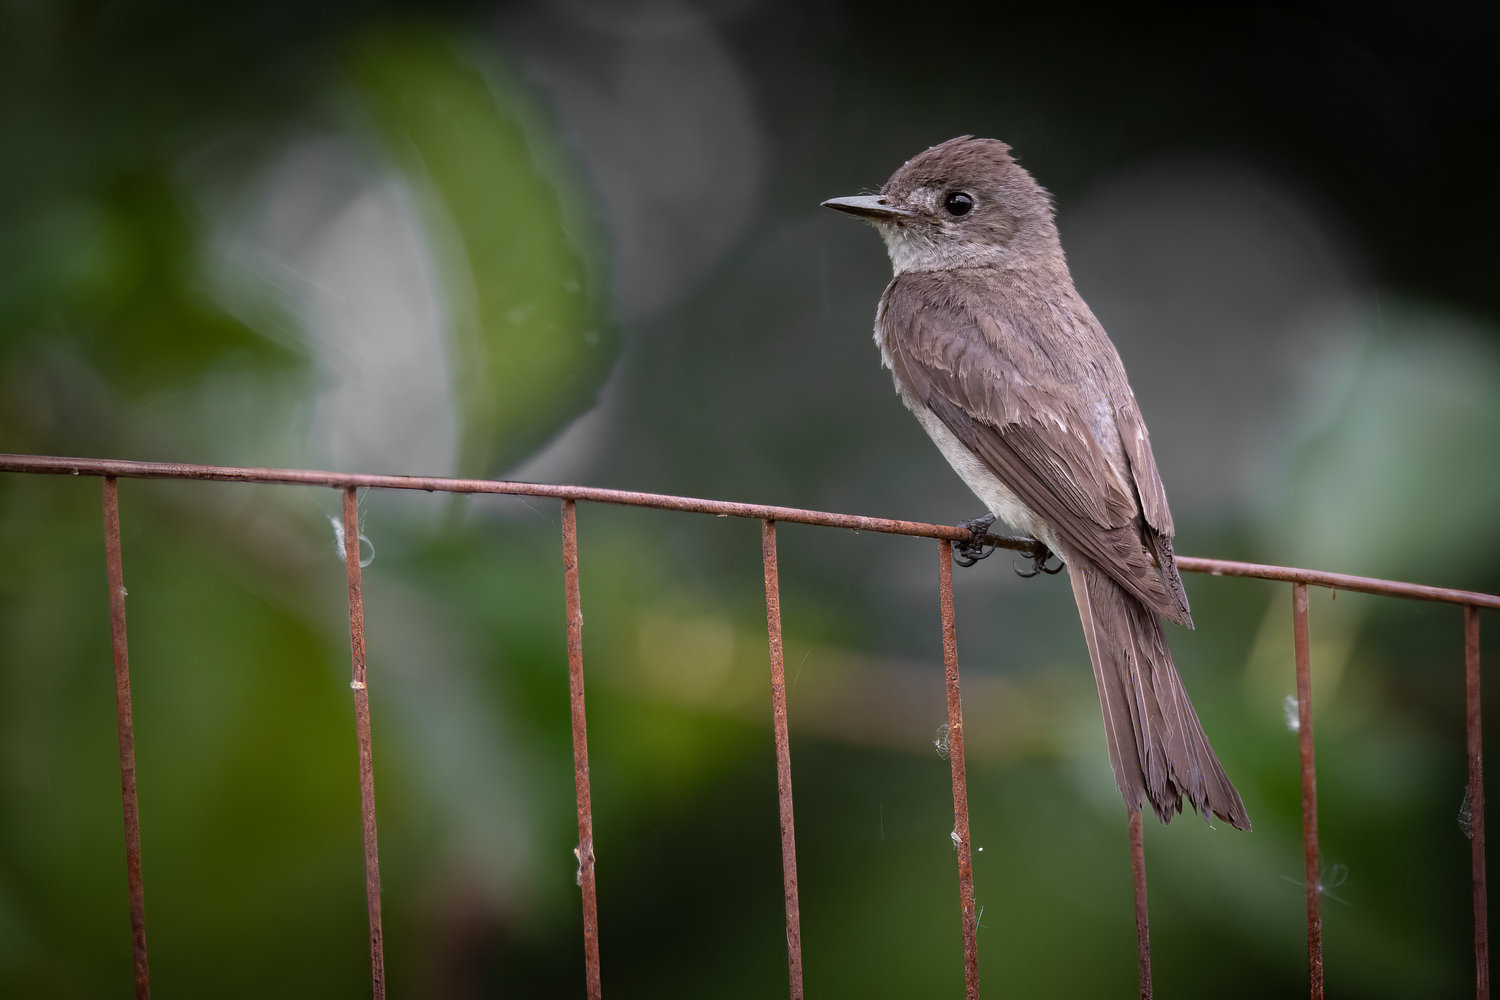 This is the Western Wood-Pewee Flycatcher.